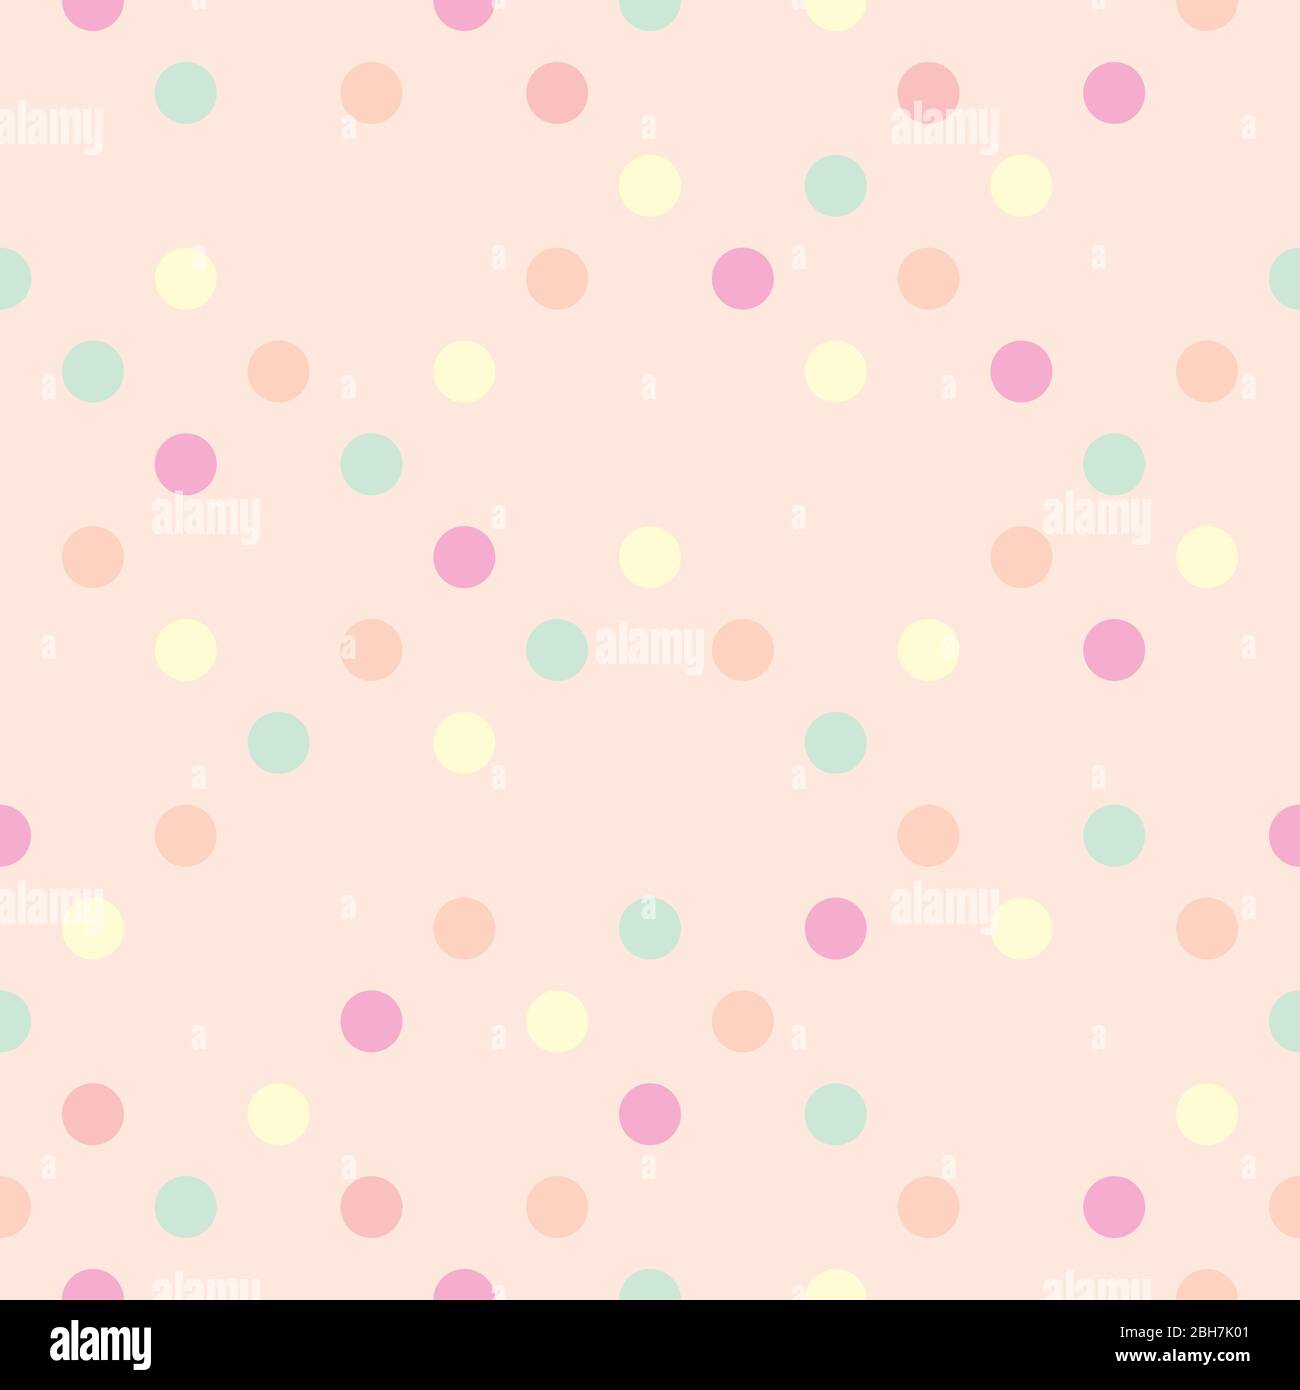 Colorful vector background with red, pink, green, blue and yellow polka ...